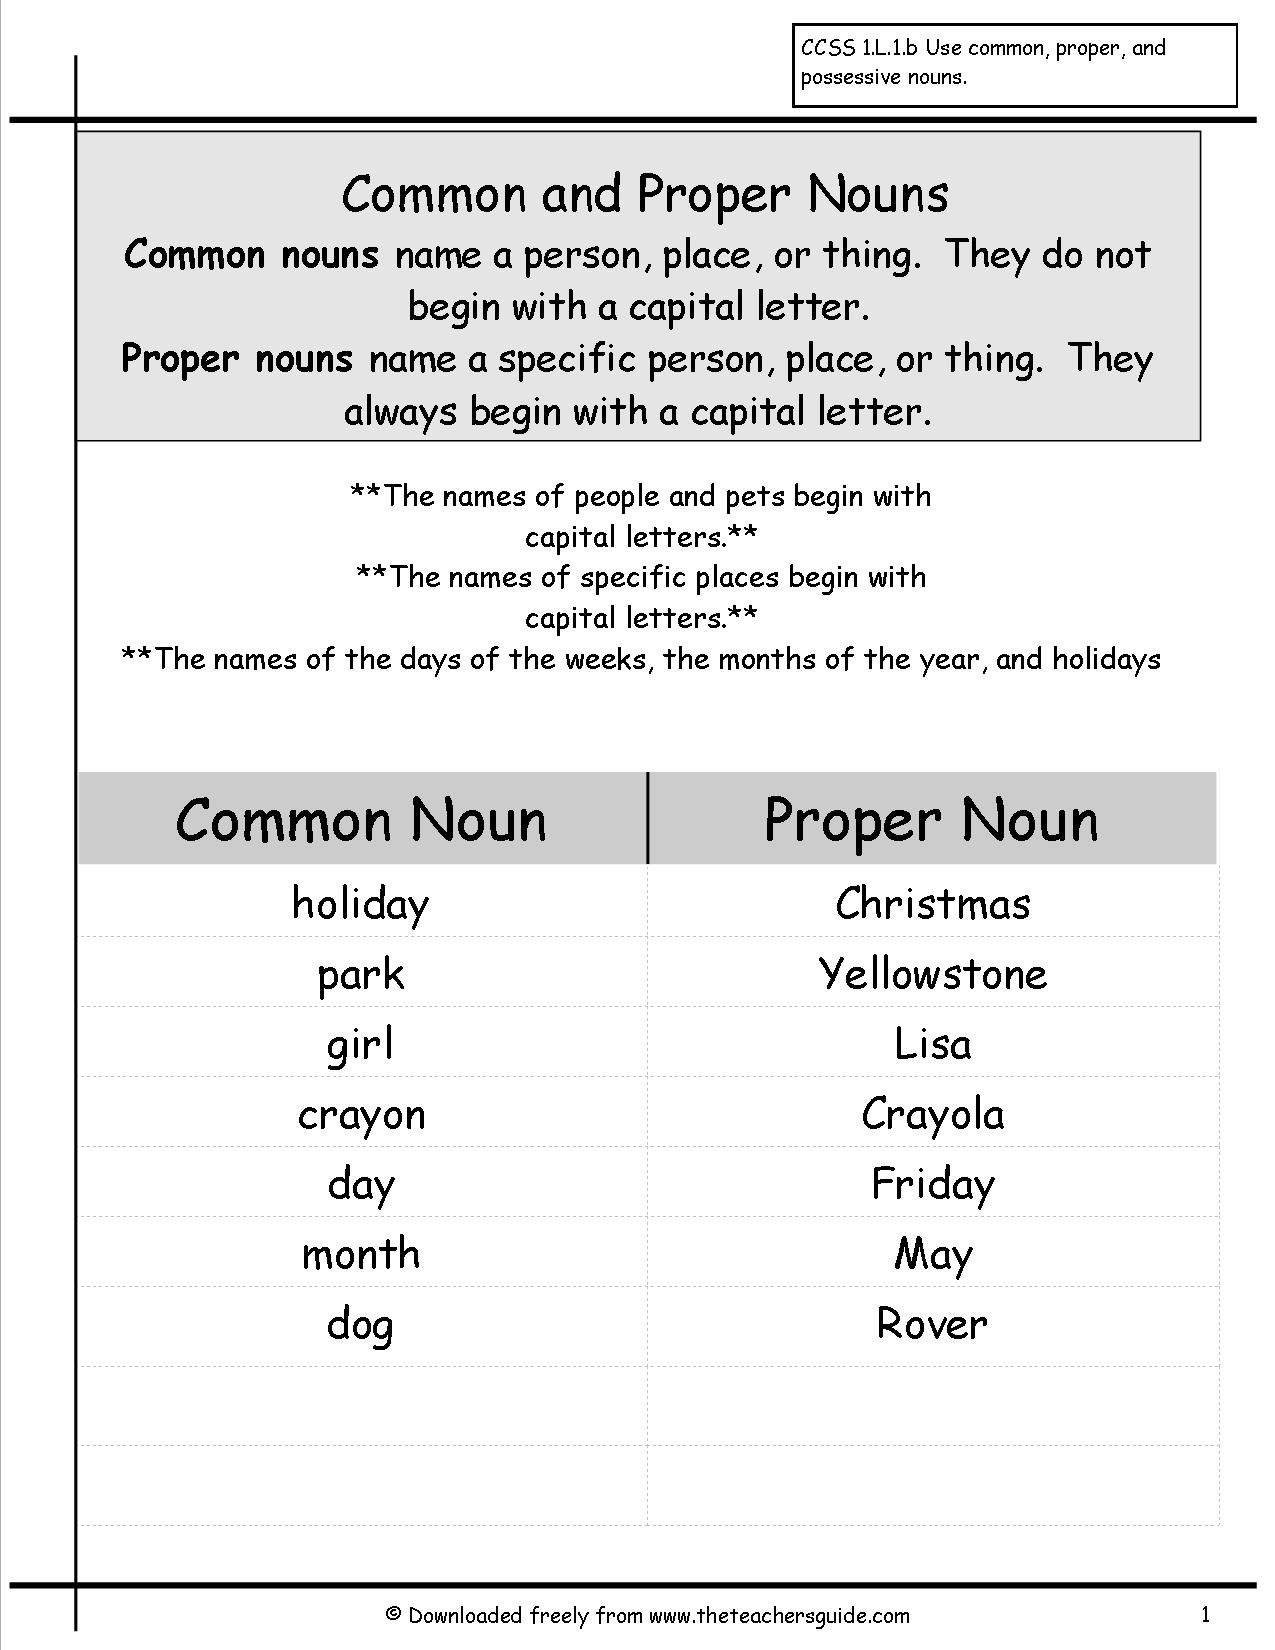 16-best-images-of-islcollective-worksheets-for-grade-3-nutrition-worksheets-for-high-school